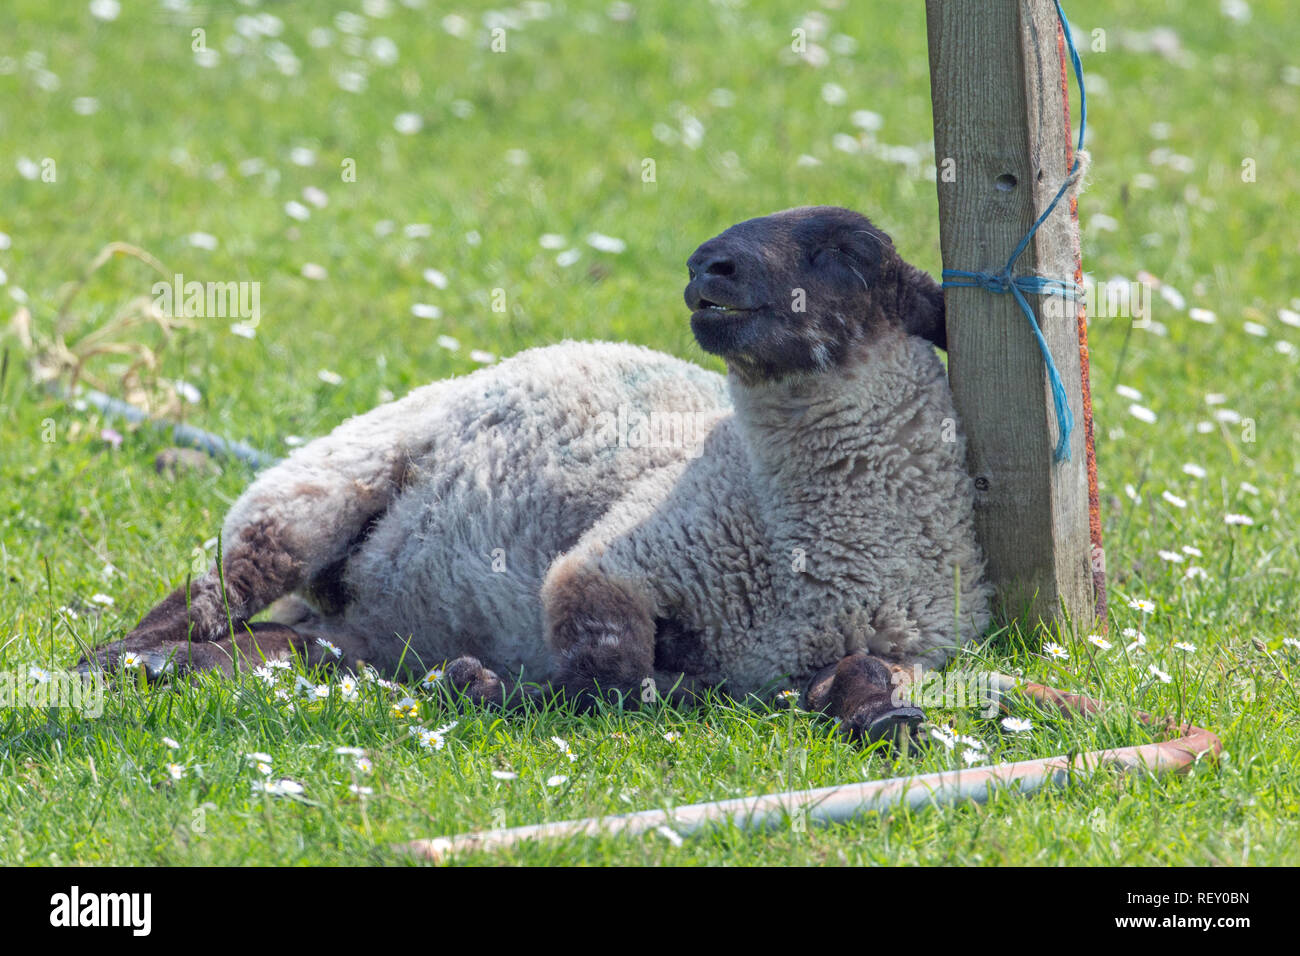 Sheep (Ovis aries), suffering from exceptionally high heat stress and a lack of cover, or shade availability in an open field situation. Leaning and propped up against a redundant fence post. Stock Photo